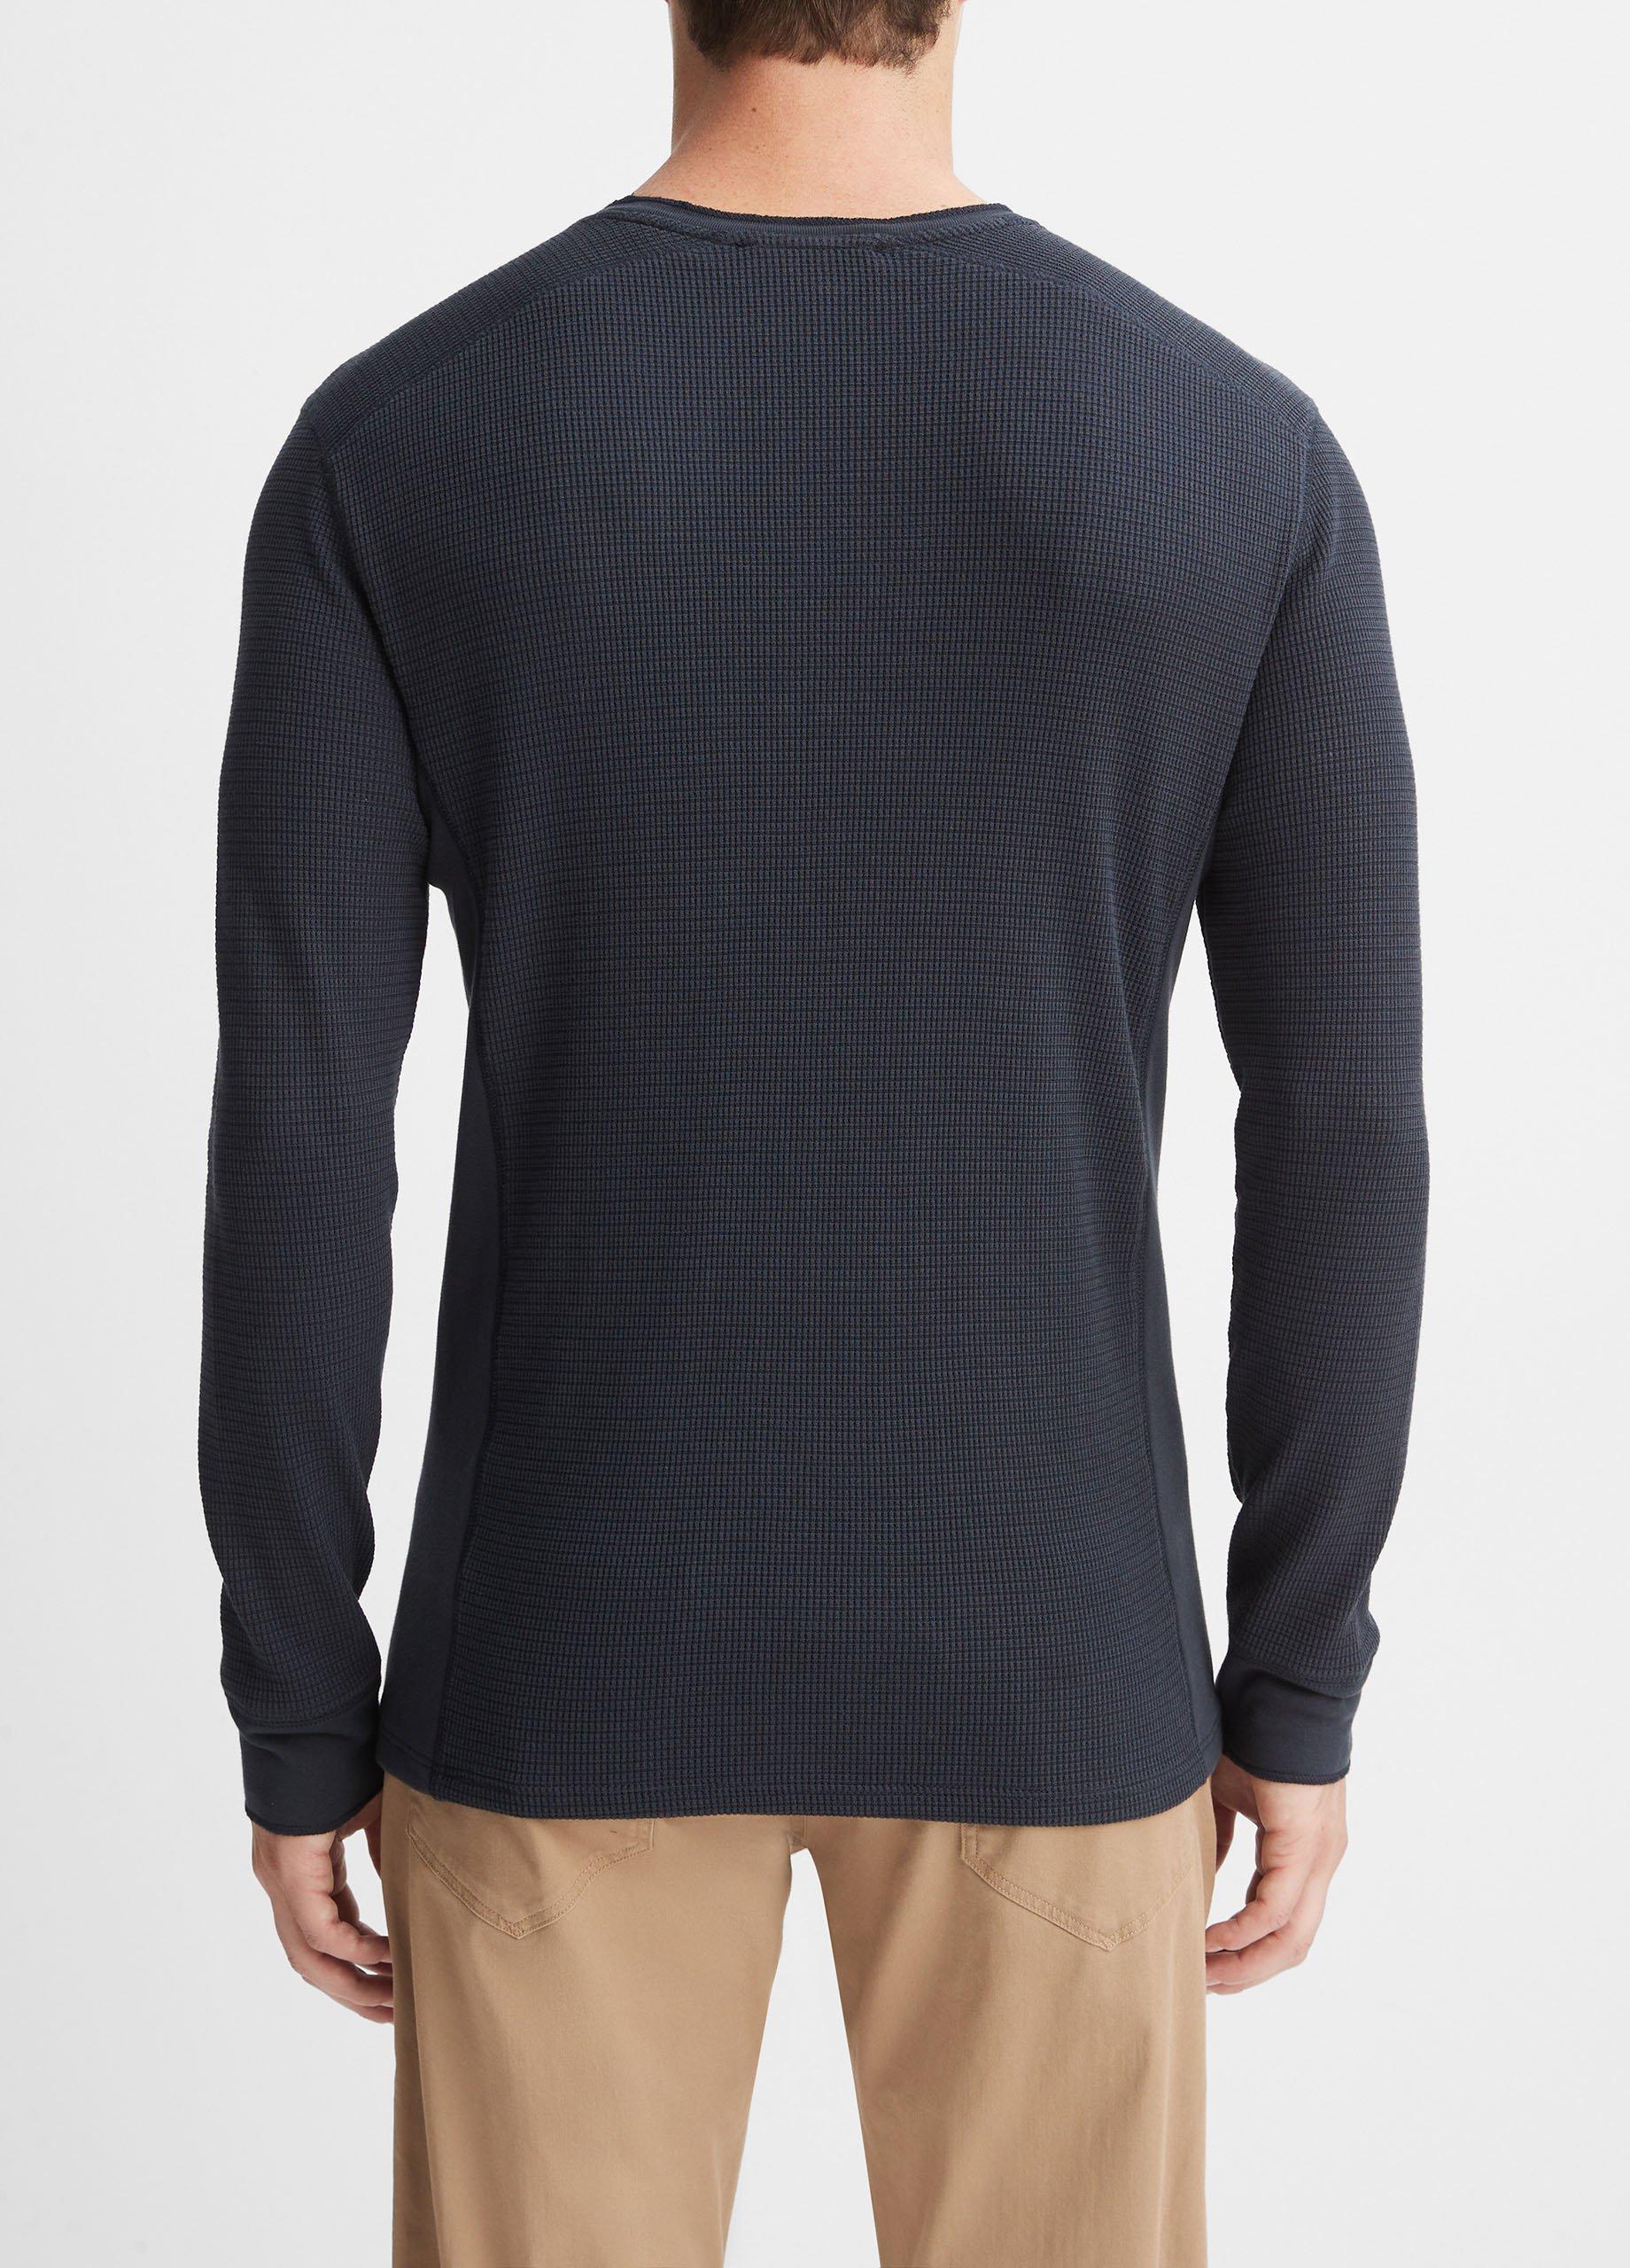 Under Armour Thermal T-shirt 275501